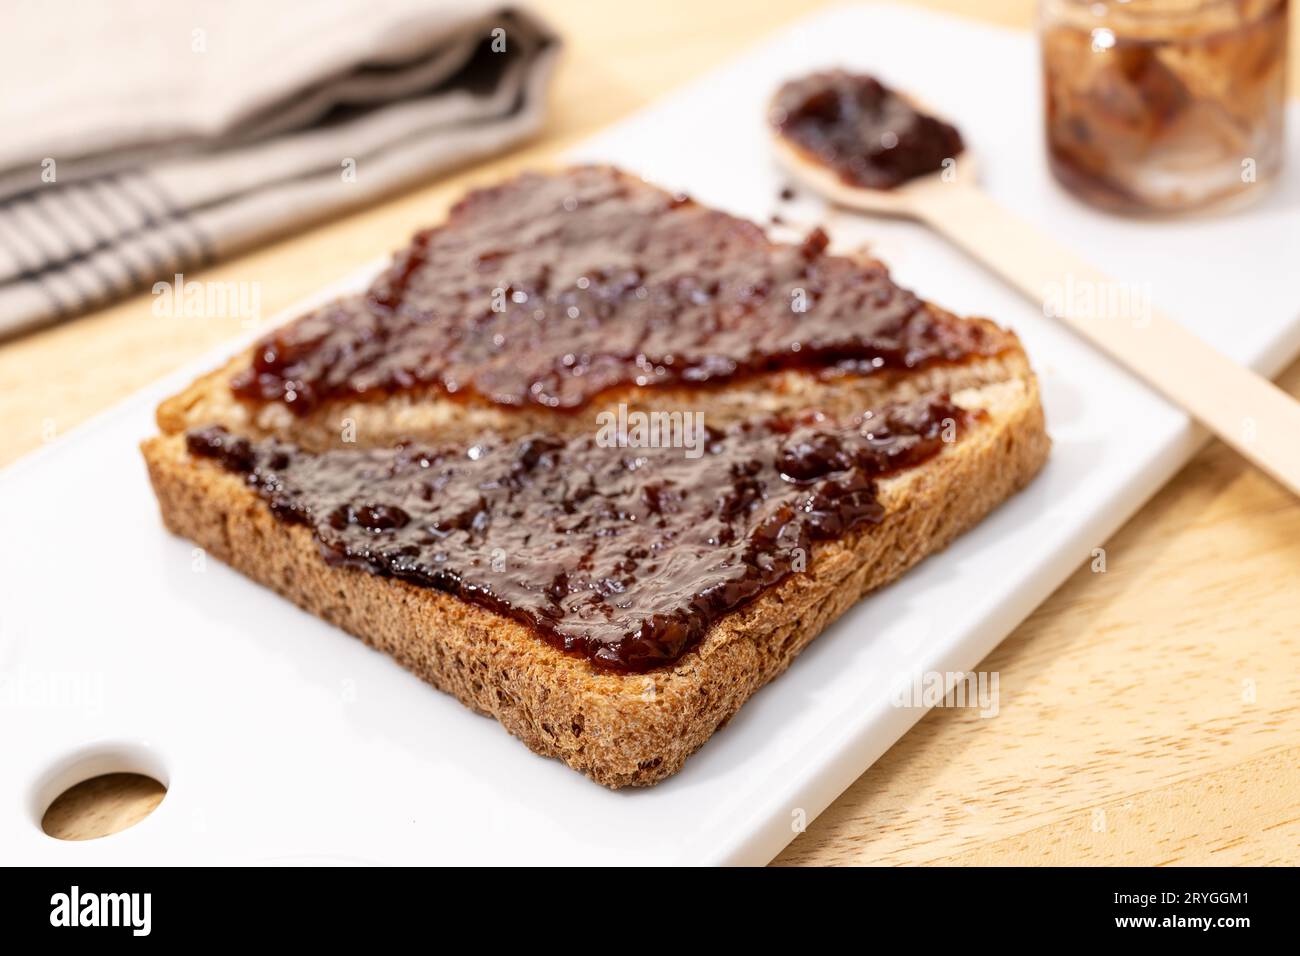 Close up of whole wheat bread Toast sandwich and raspberry organic jam on wooden table Stock Photo